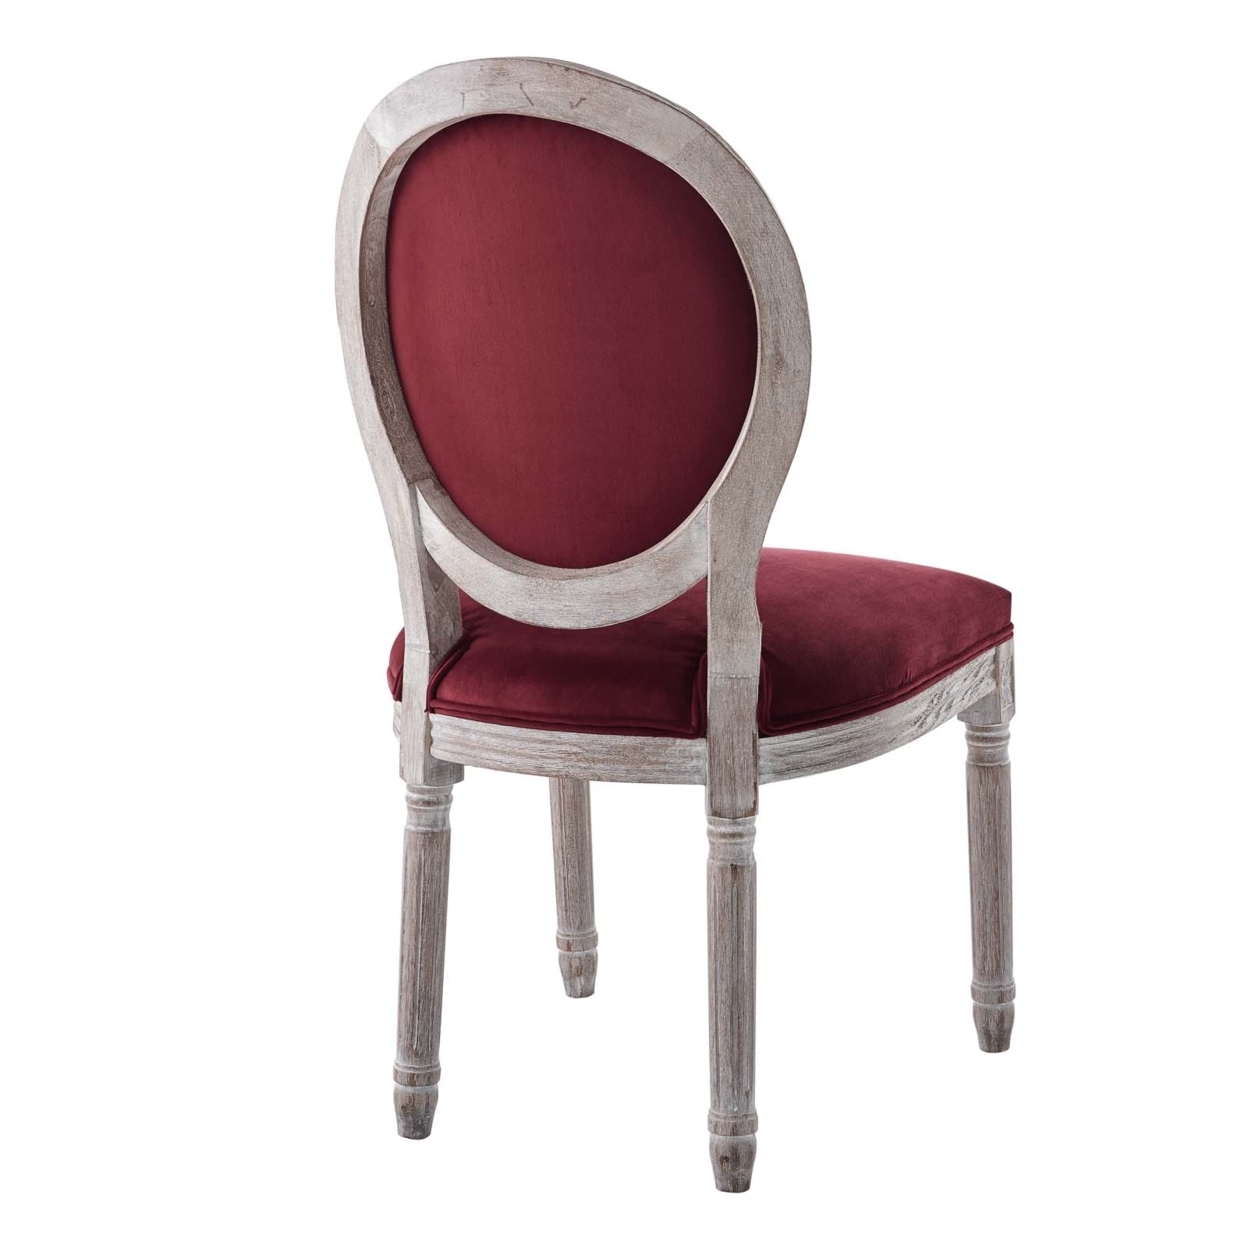 Arise Vintage French Performance Velvet Dining Side Chair, Natural Maroon